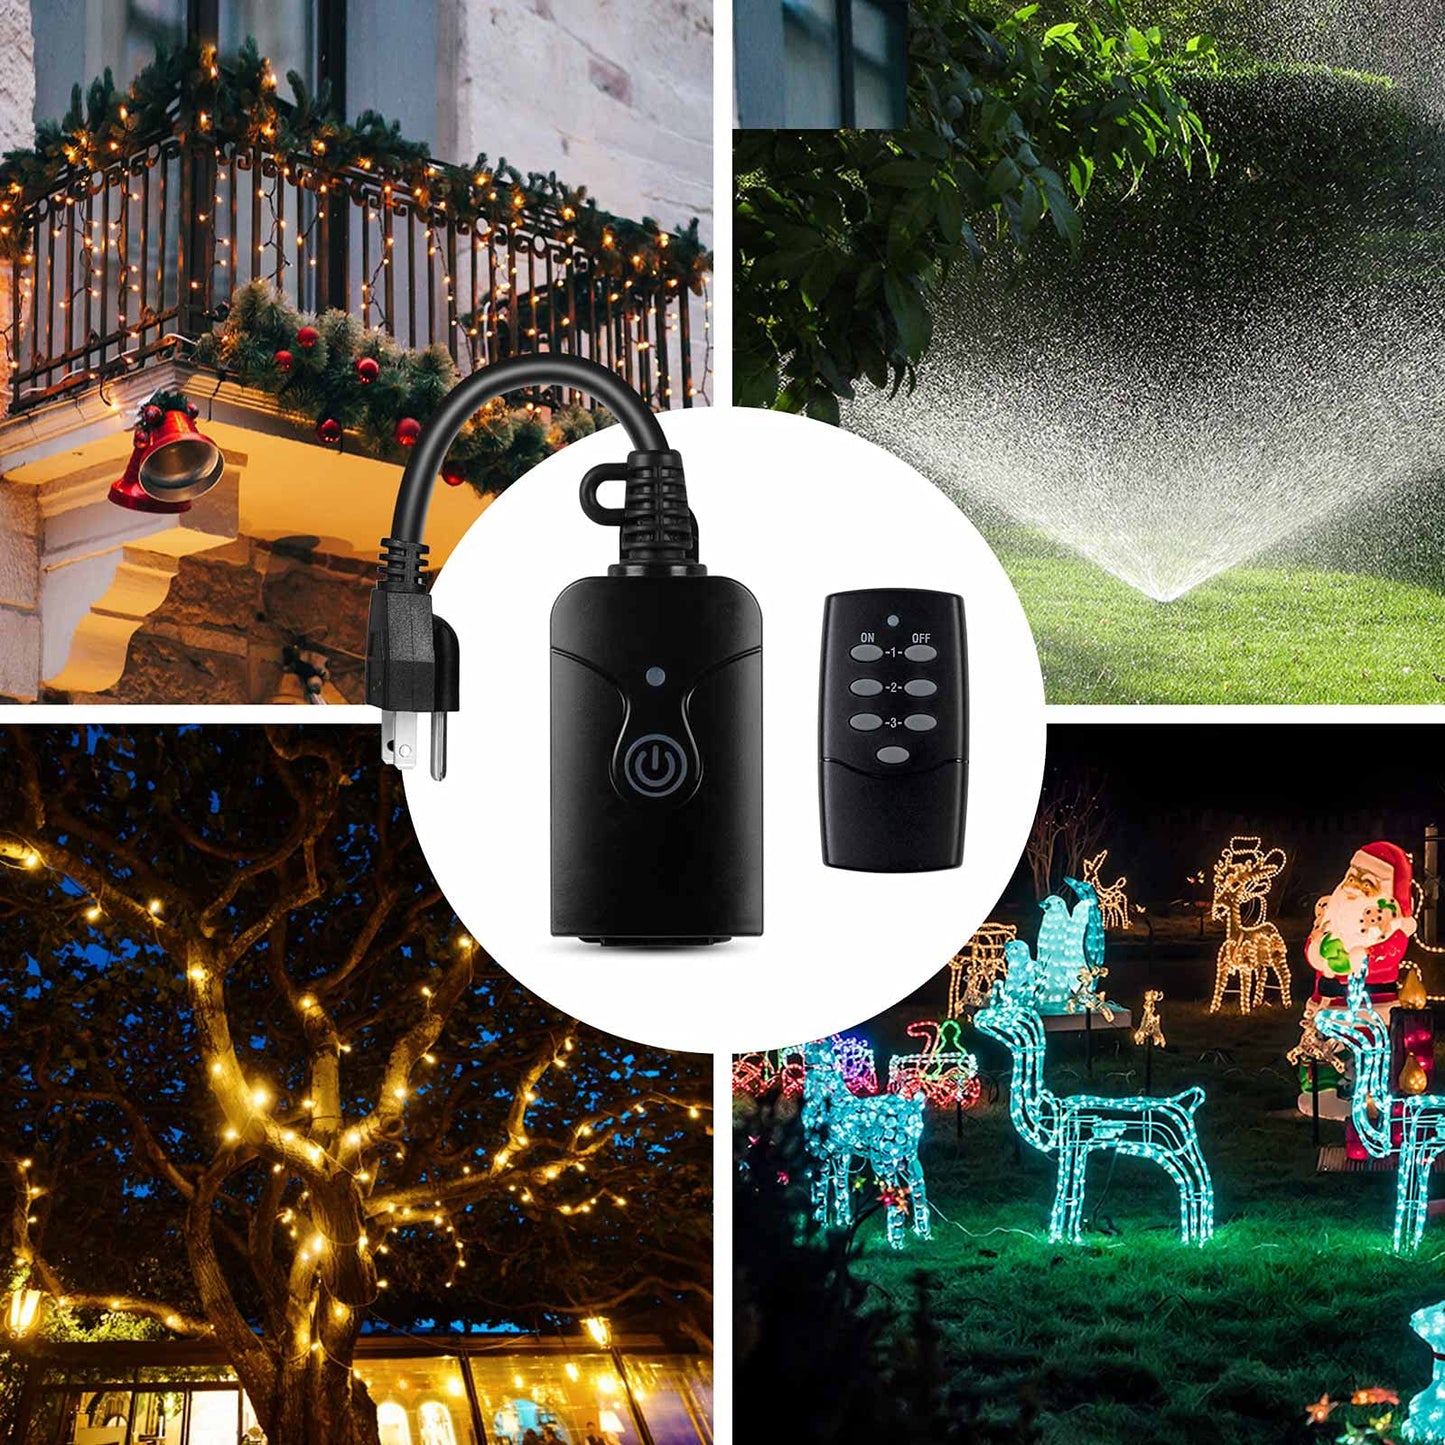 HBN Wireless Remote Control 3-Prong Outlet - Outdoor Indoor Heavy Duty Weatherproof - 1 Remote & 3 Outlets, 100ft Range - Battery Included (Black)